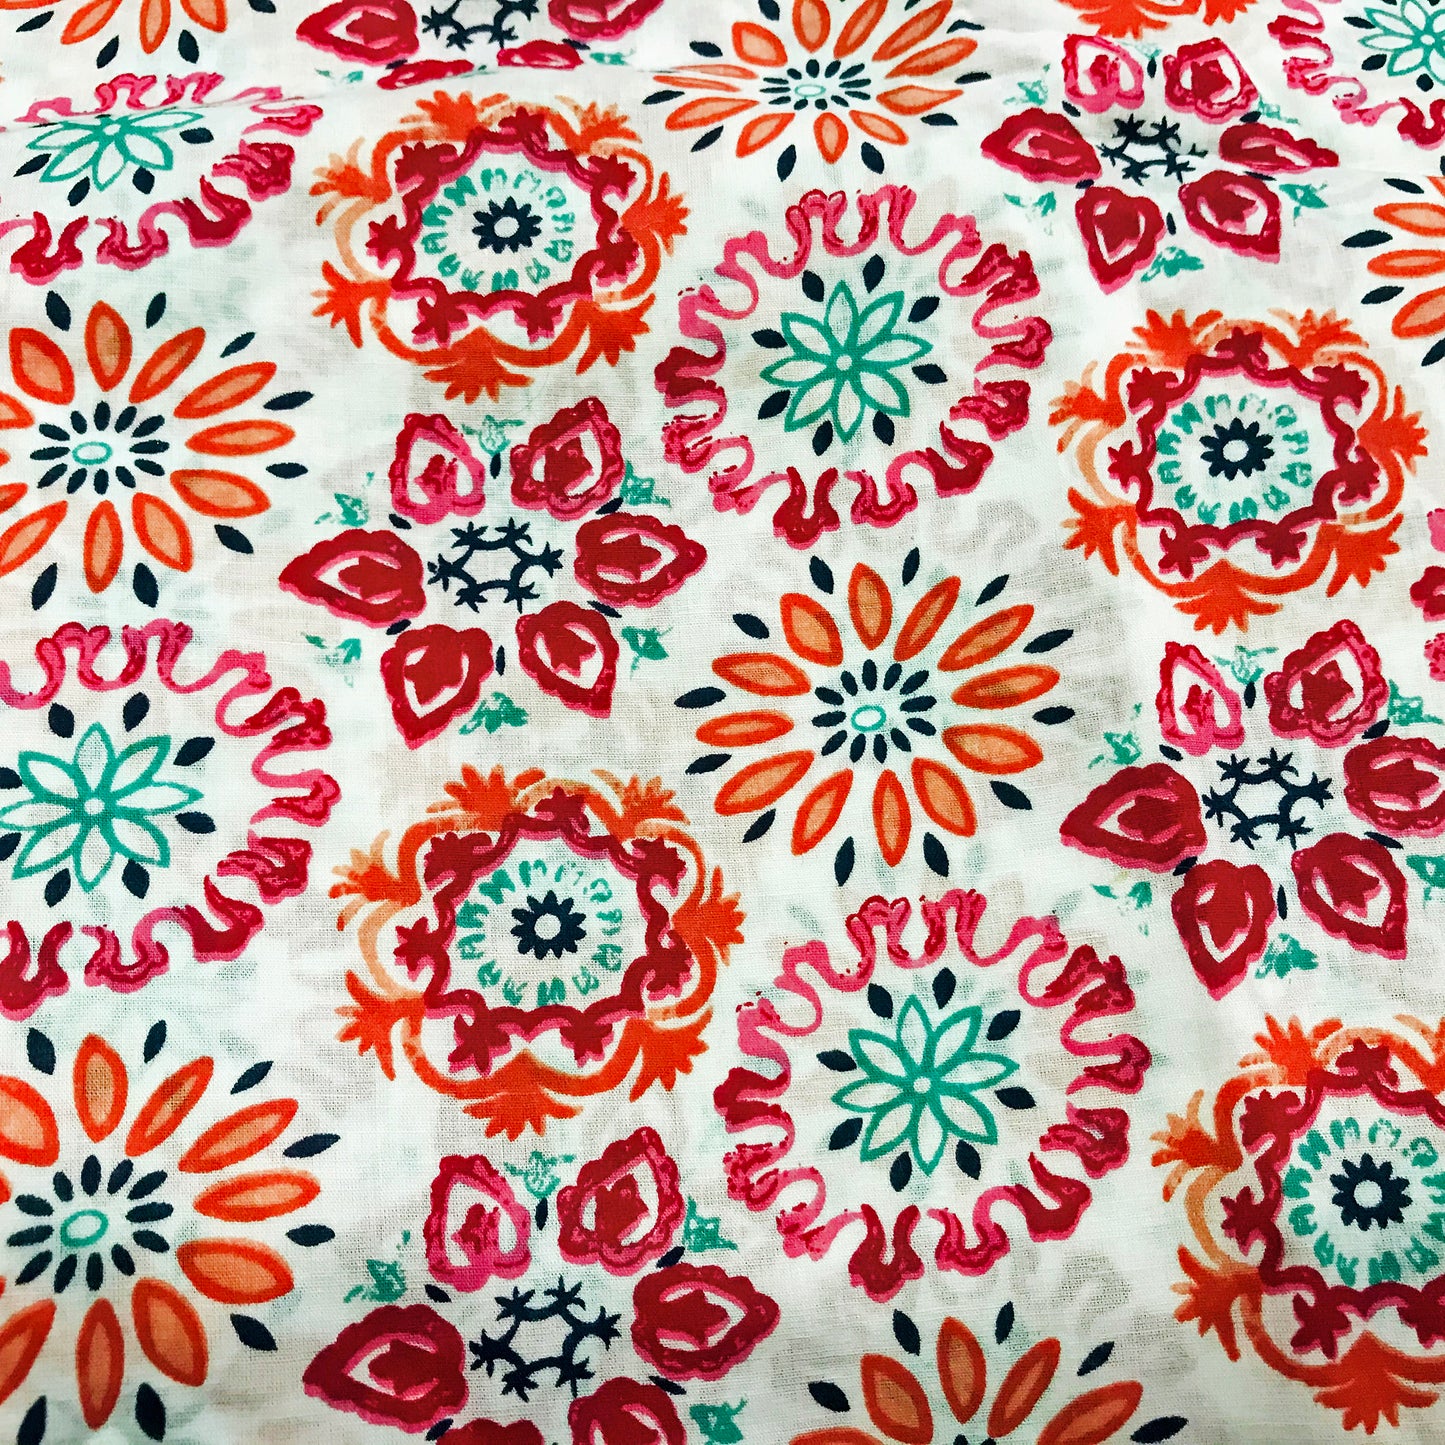 Summery Floral Printed Cotton Fabric